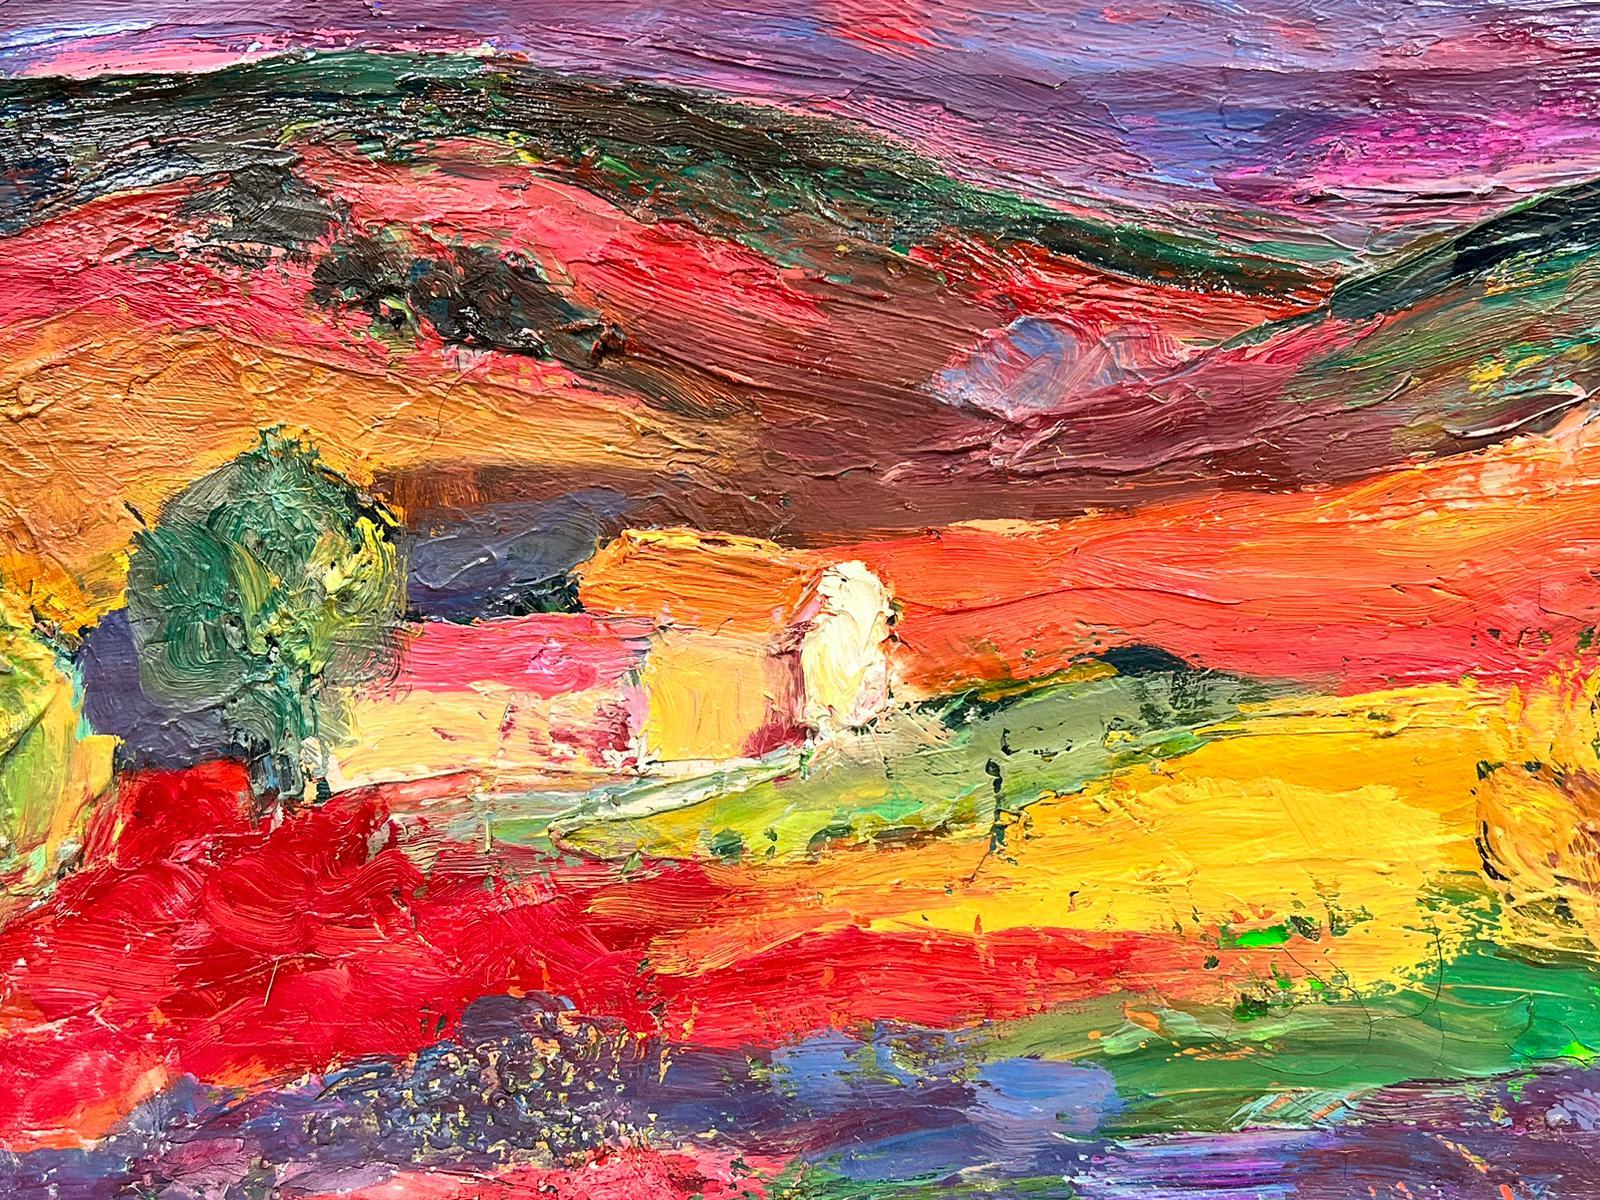 French Expressionist artist, circa 1950's
Provencal landscape with dramatic almost Fauve like colors, including purple, gold, yellow and reds. 
oil on canvas, unframed
canvas: 11.5 x 14 inches
the painting is in overall very good and sound